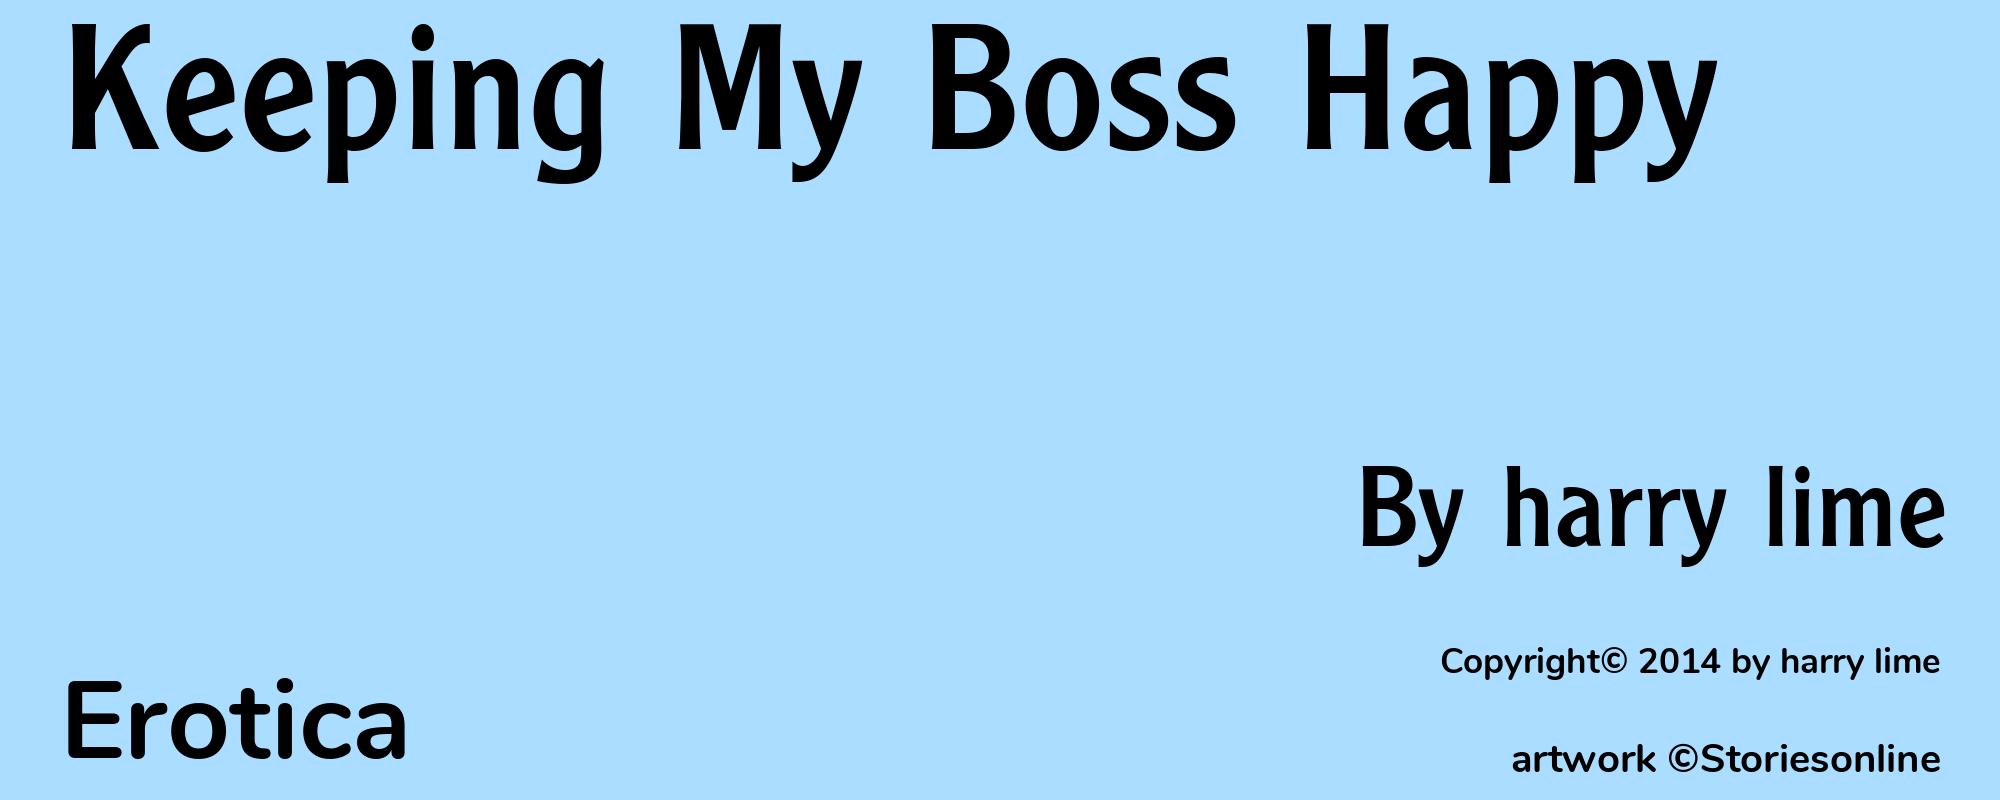 Keeping My Boss Happy - Cover